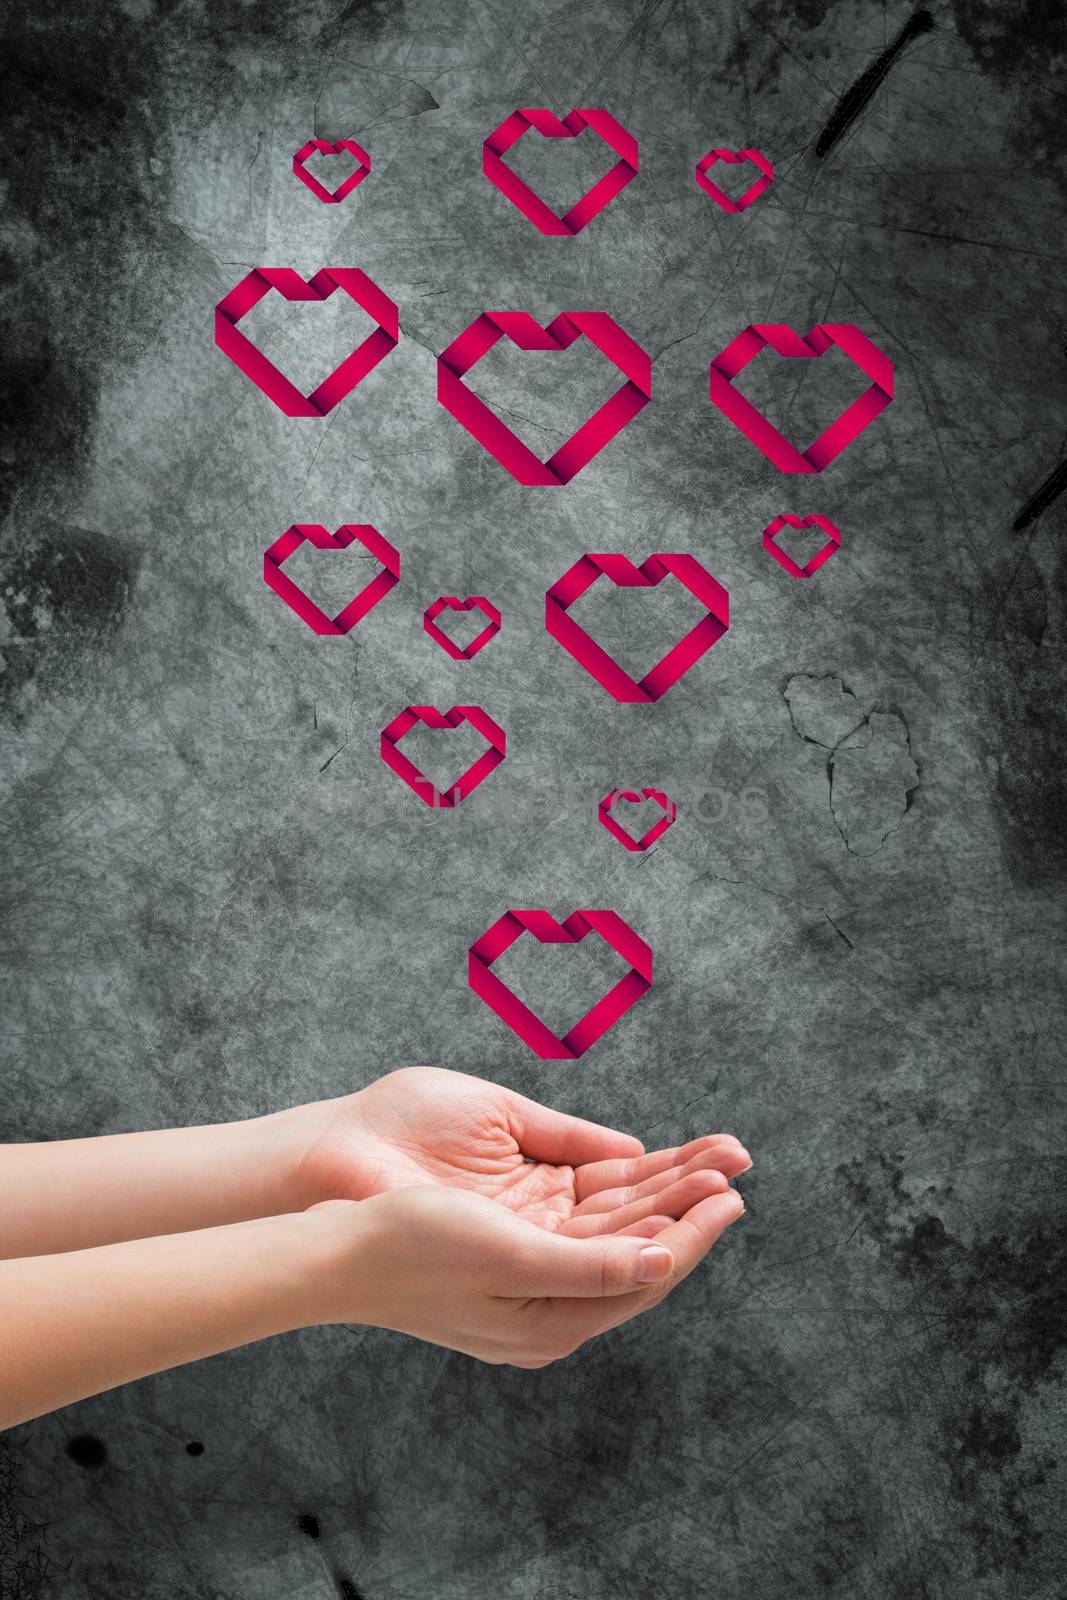 Hands presenting against heart